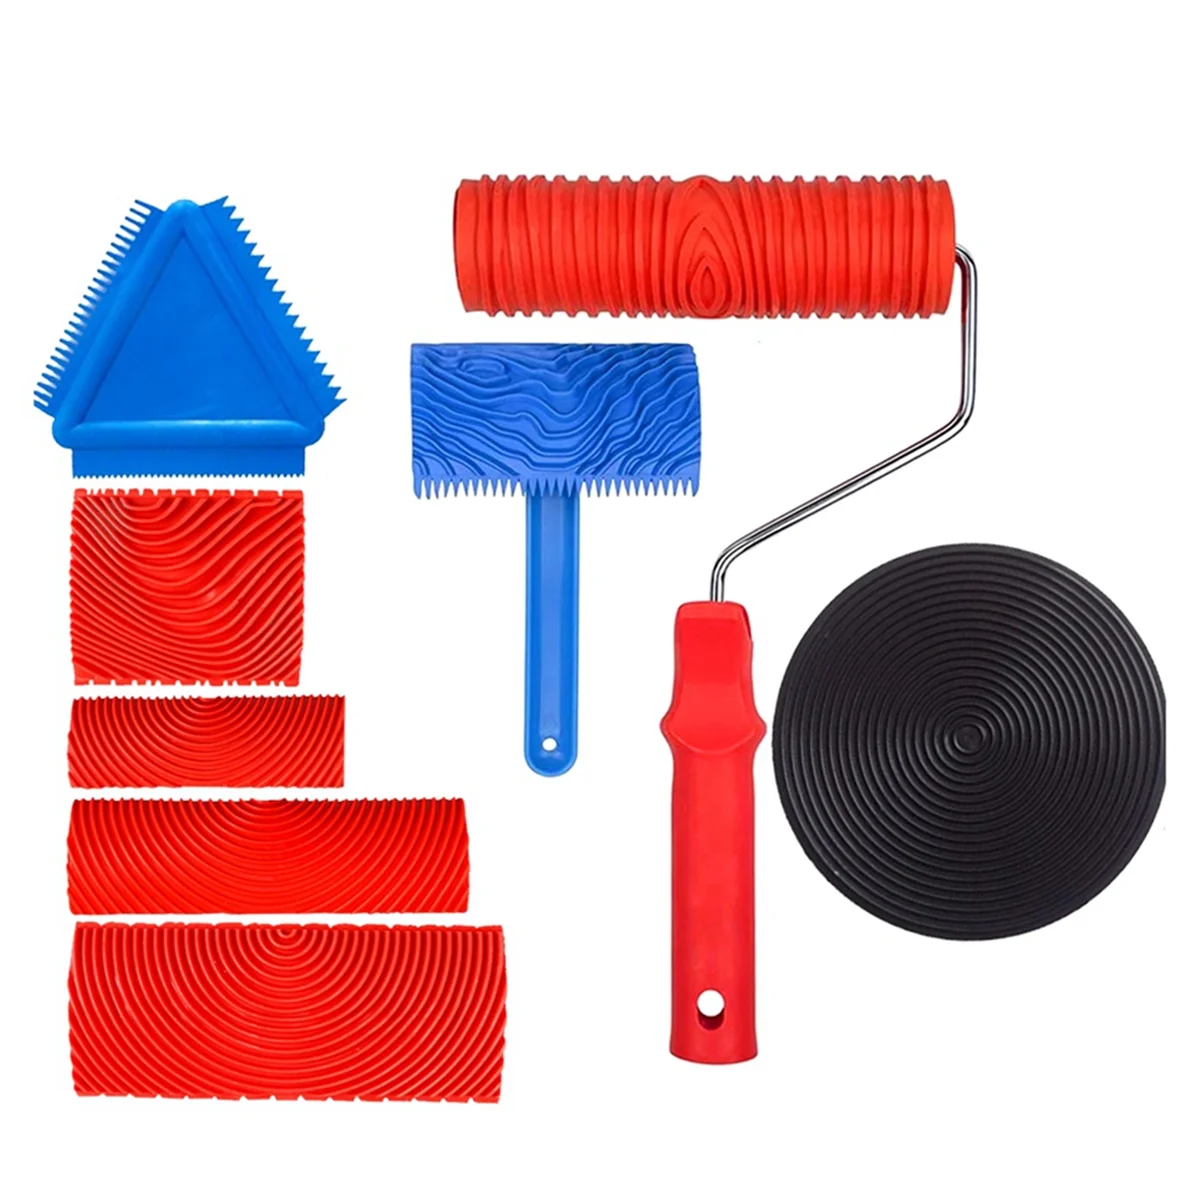 

Rubber Wood Graining Tools Set Texture DIY Paint Roller Brush Pattern for Wall Room Home Yard Garden Painting Tools